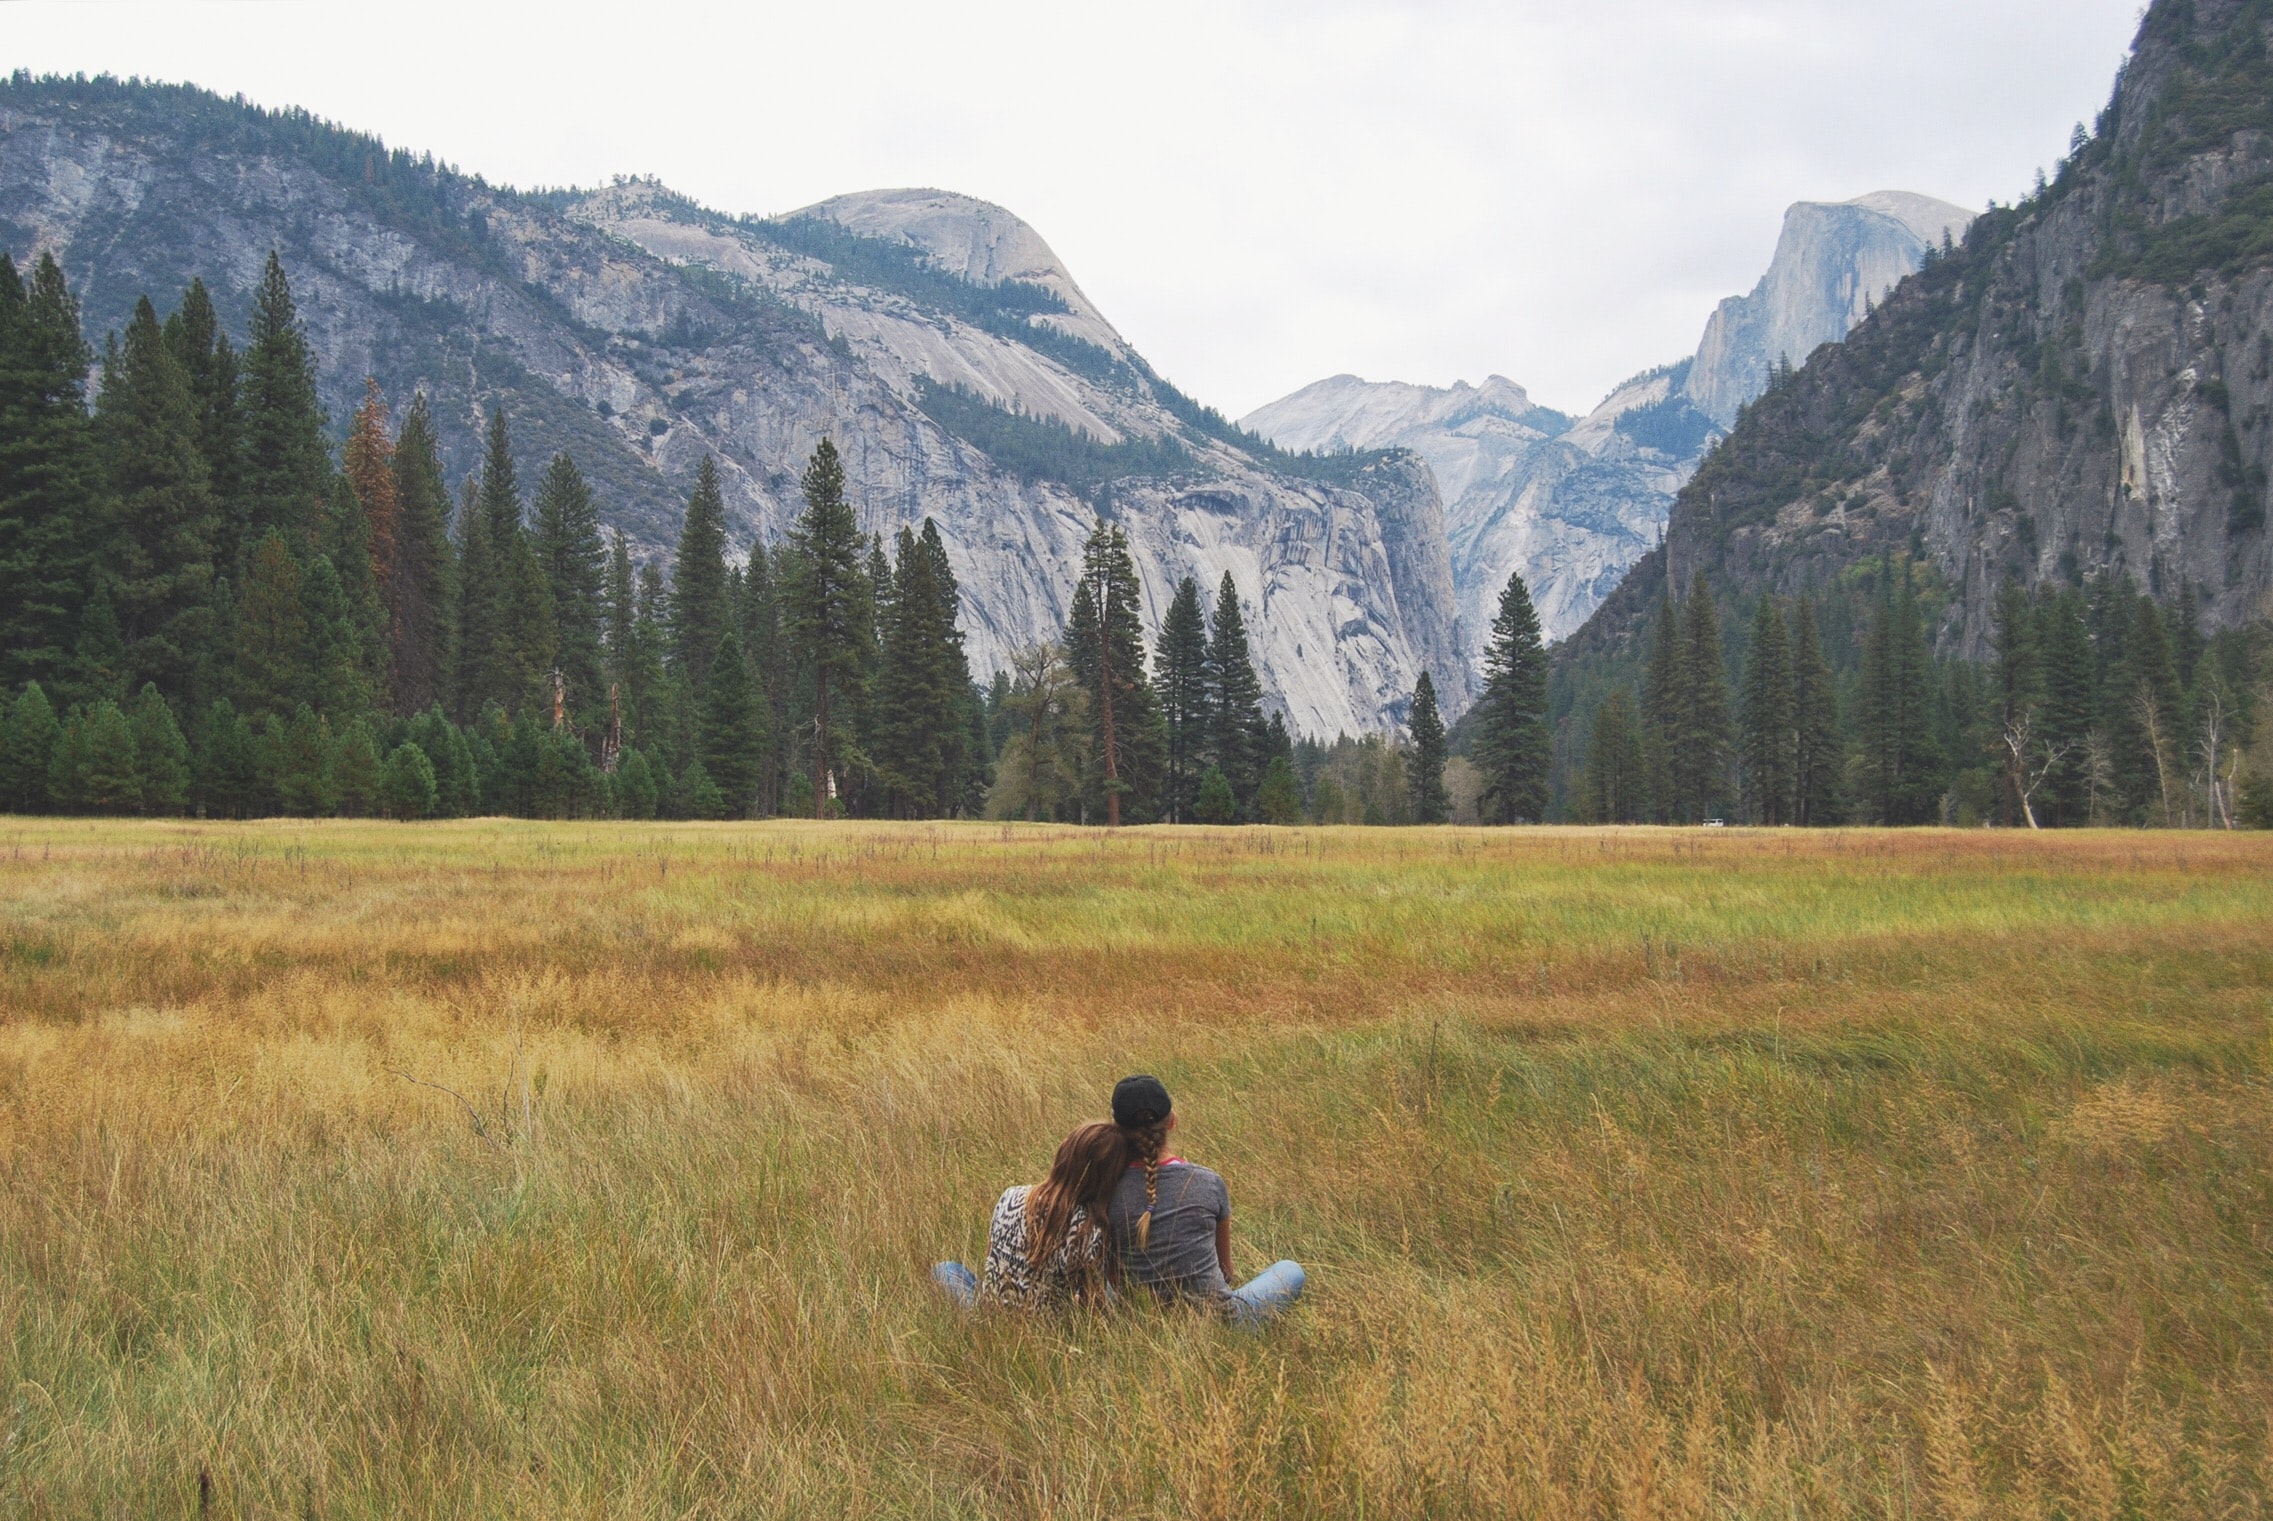 Couple Sitting in Grass Field Looking at Mountain Range